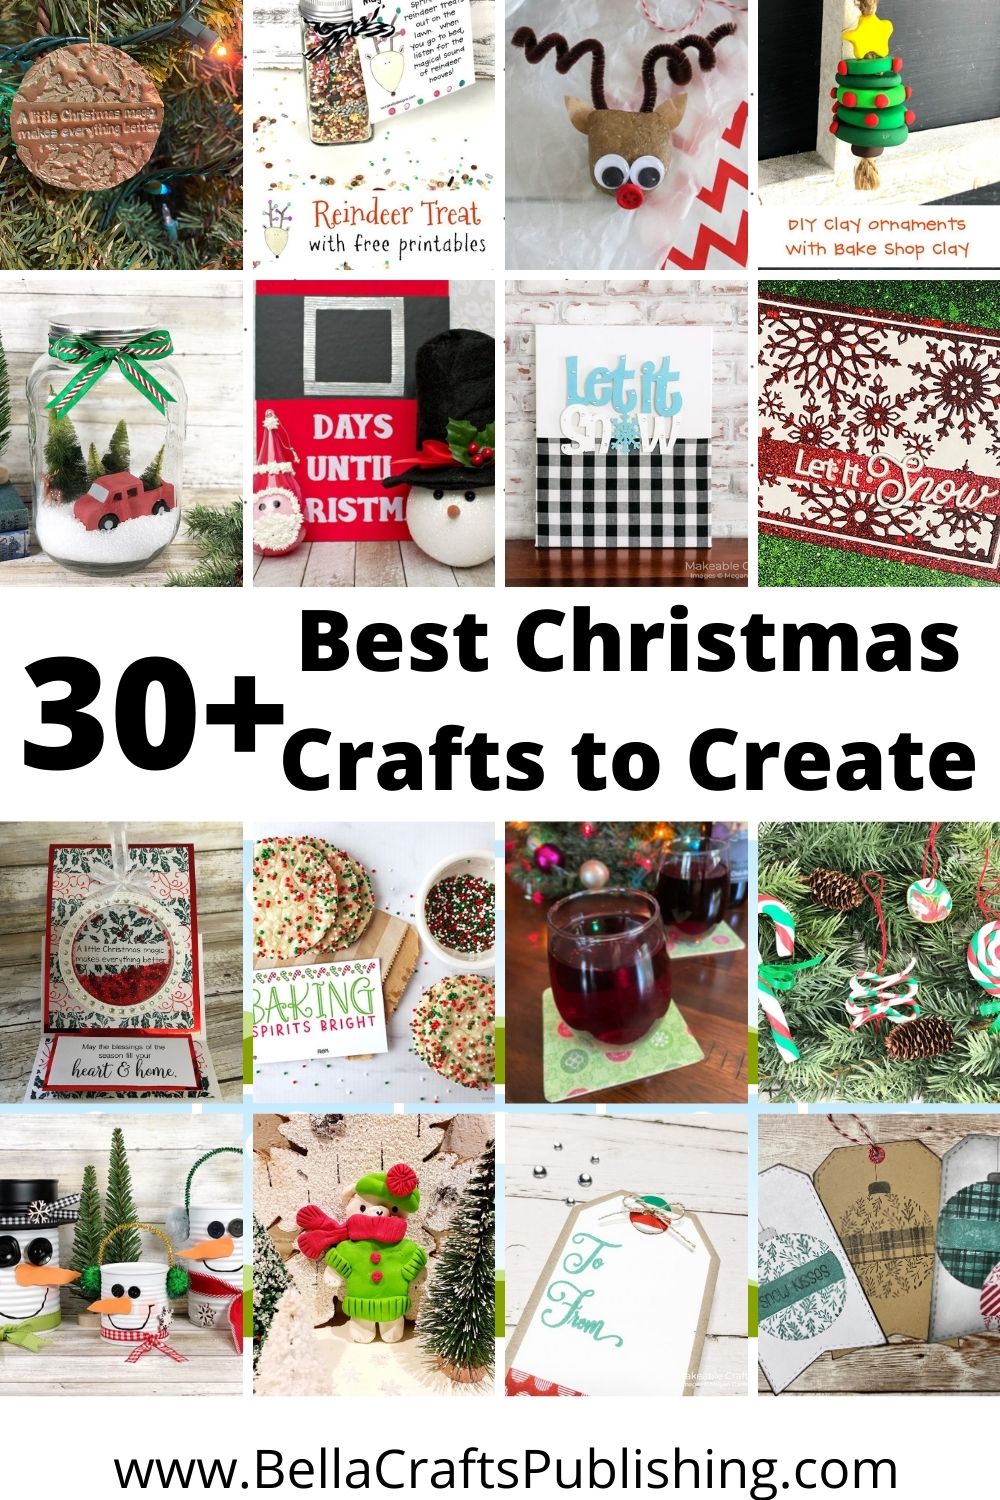 30+ Best Christmas Crafts to Create